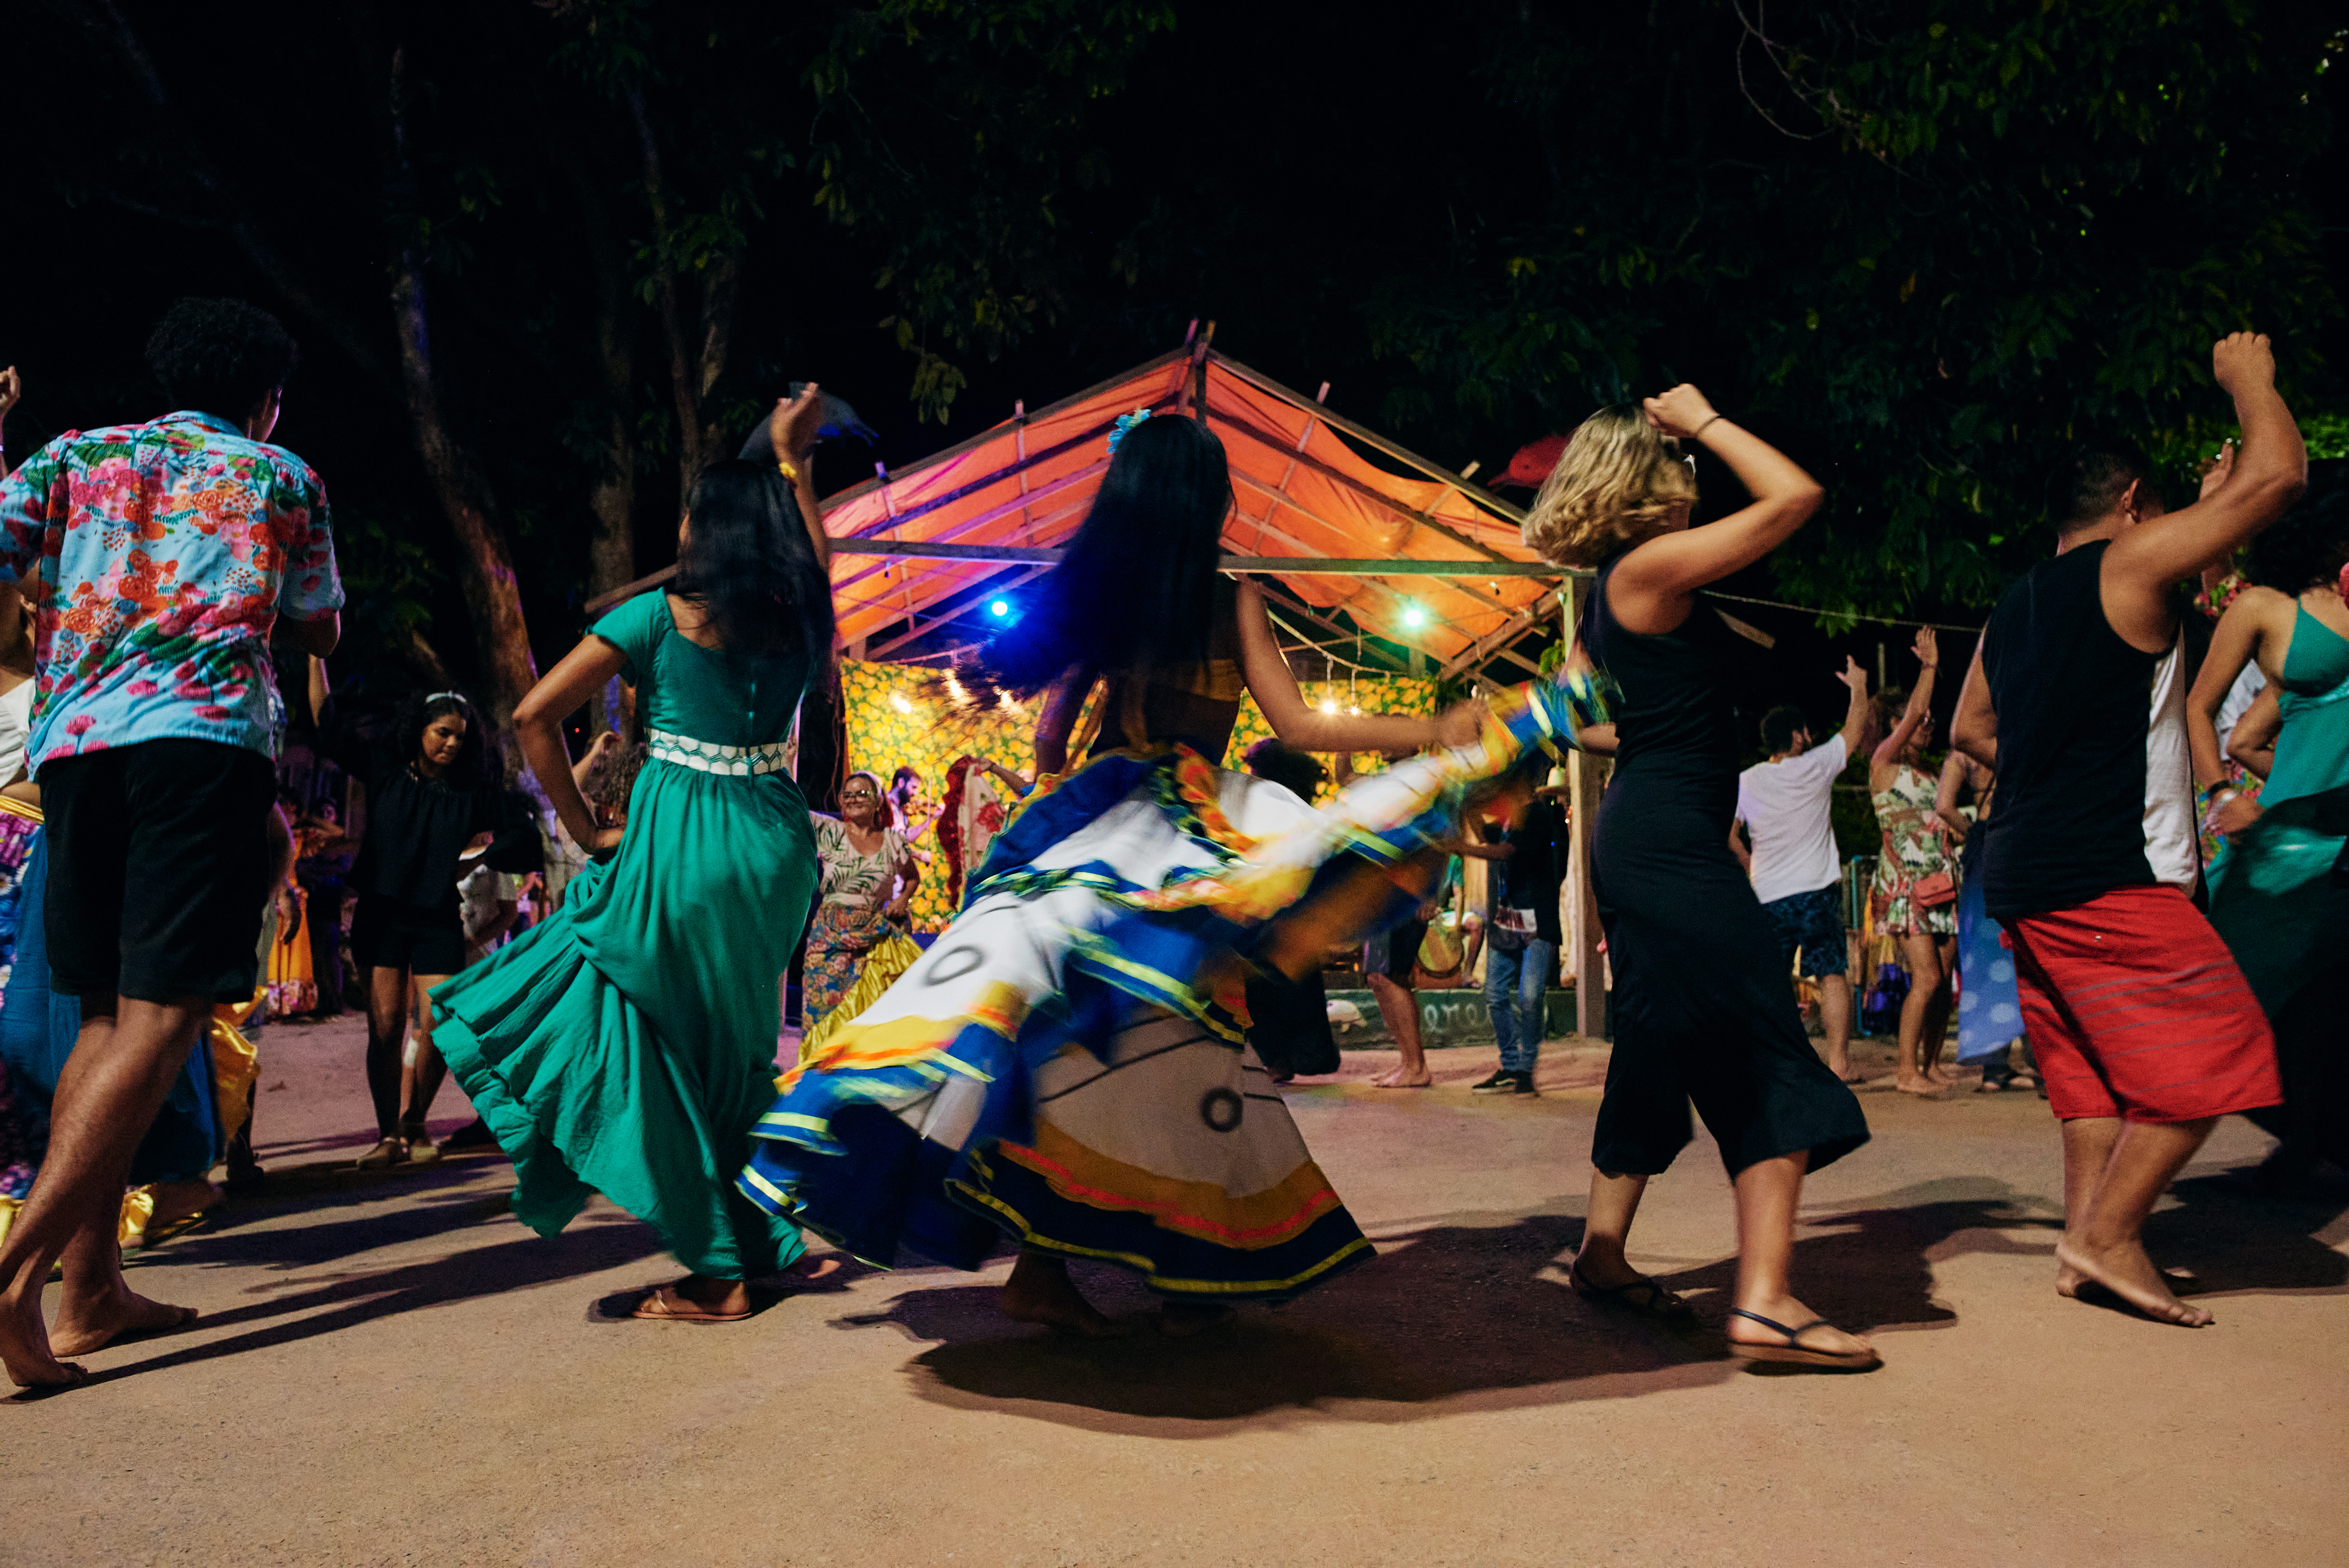 People with traditional colorful outfits dancing in the Carnival